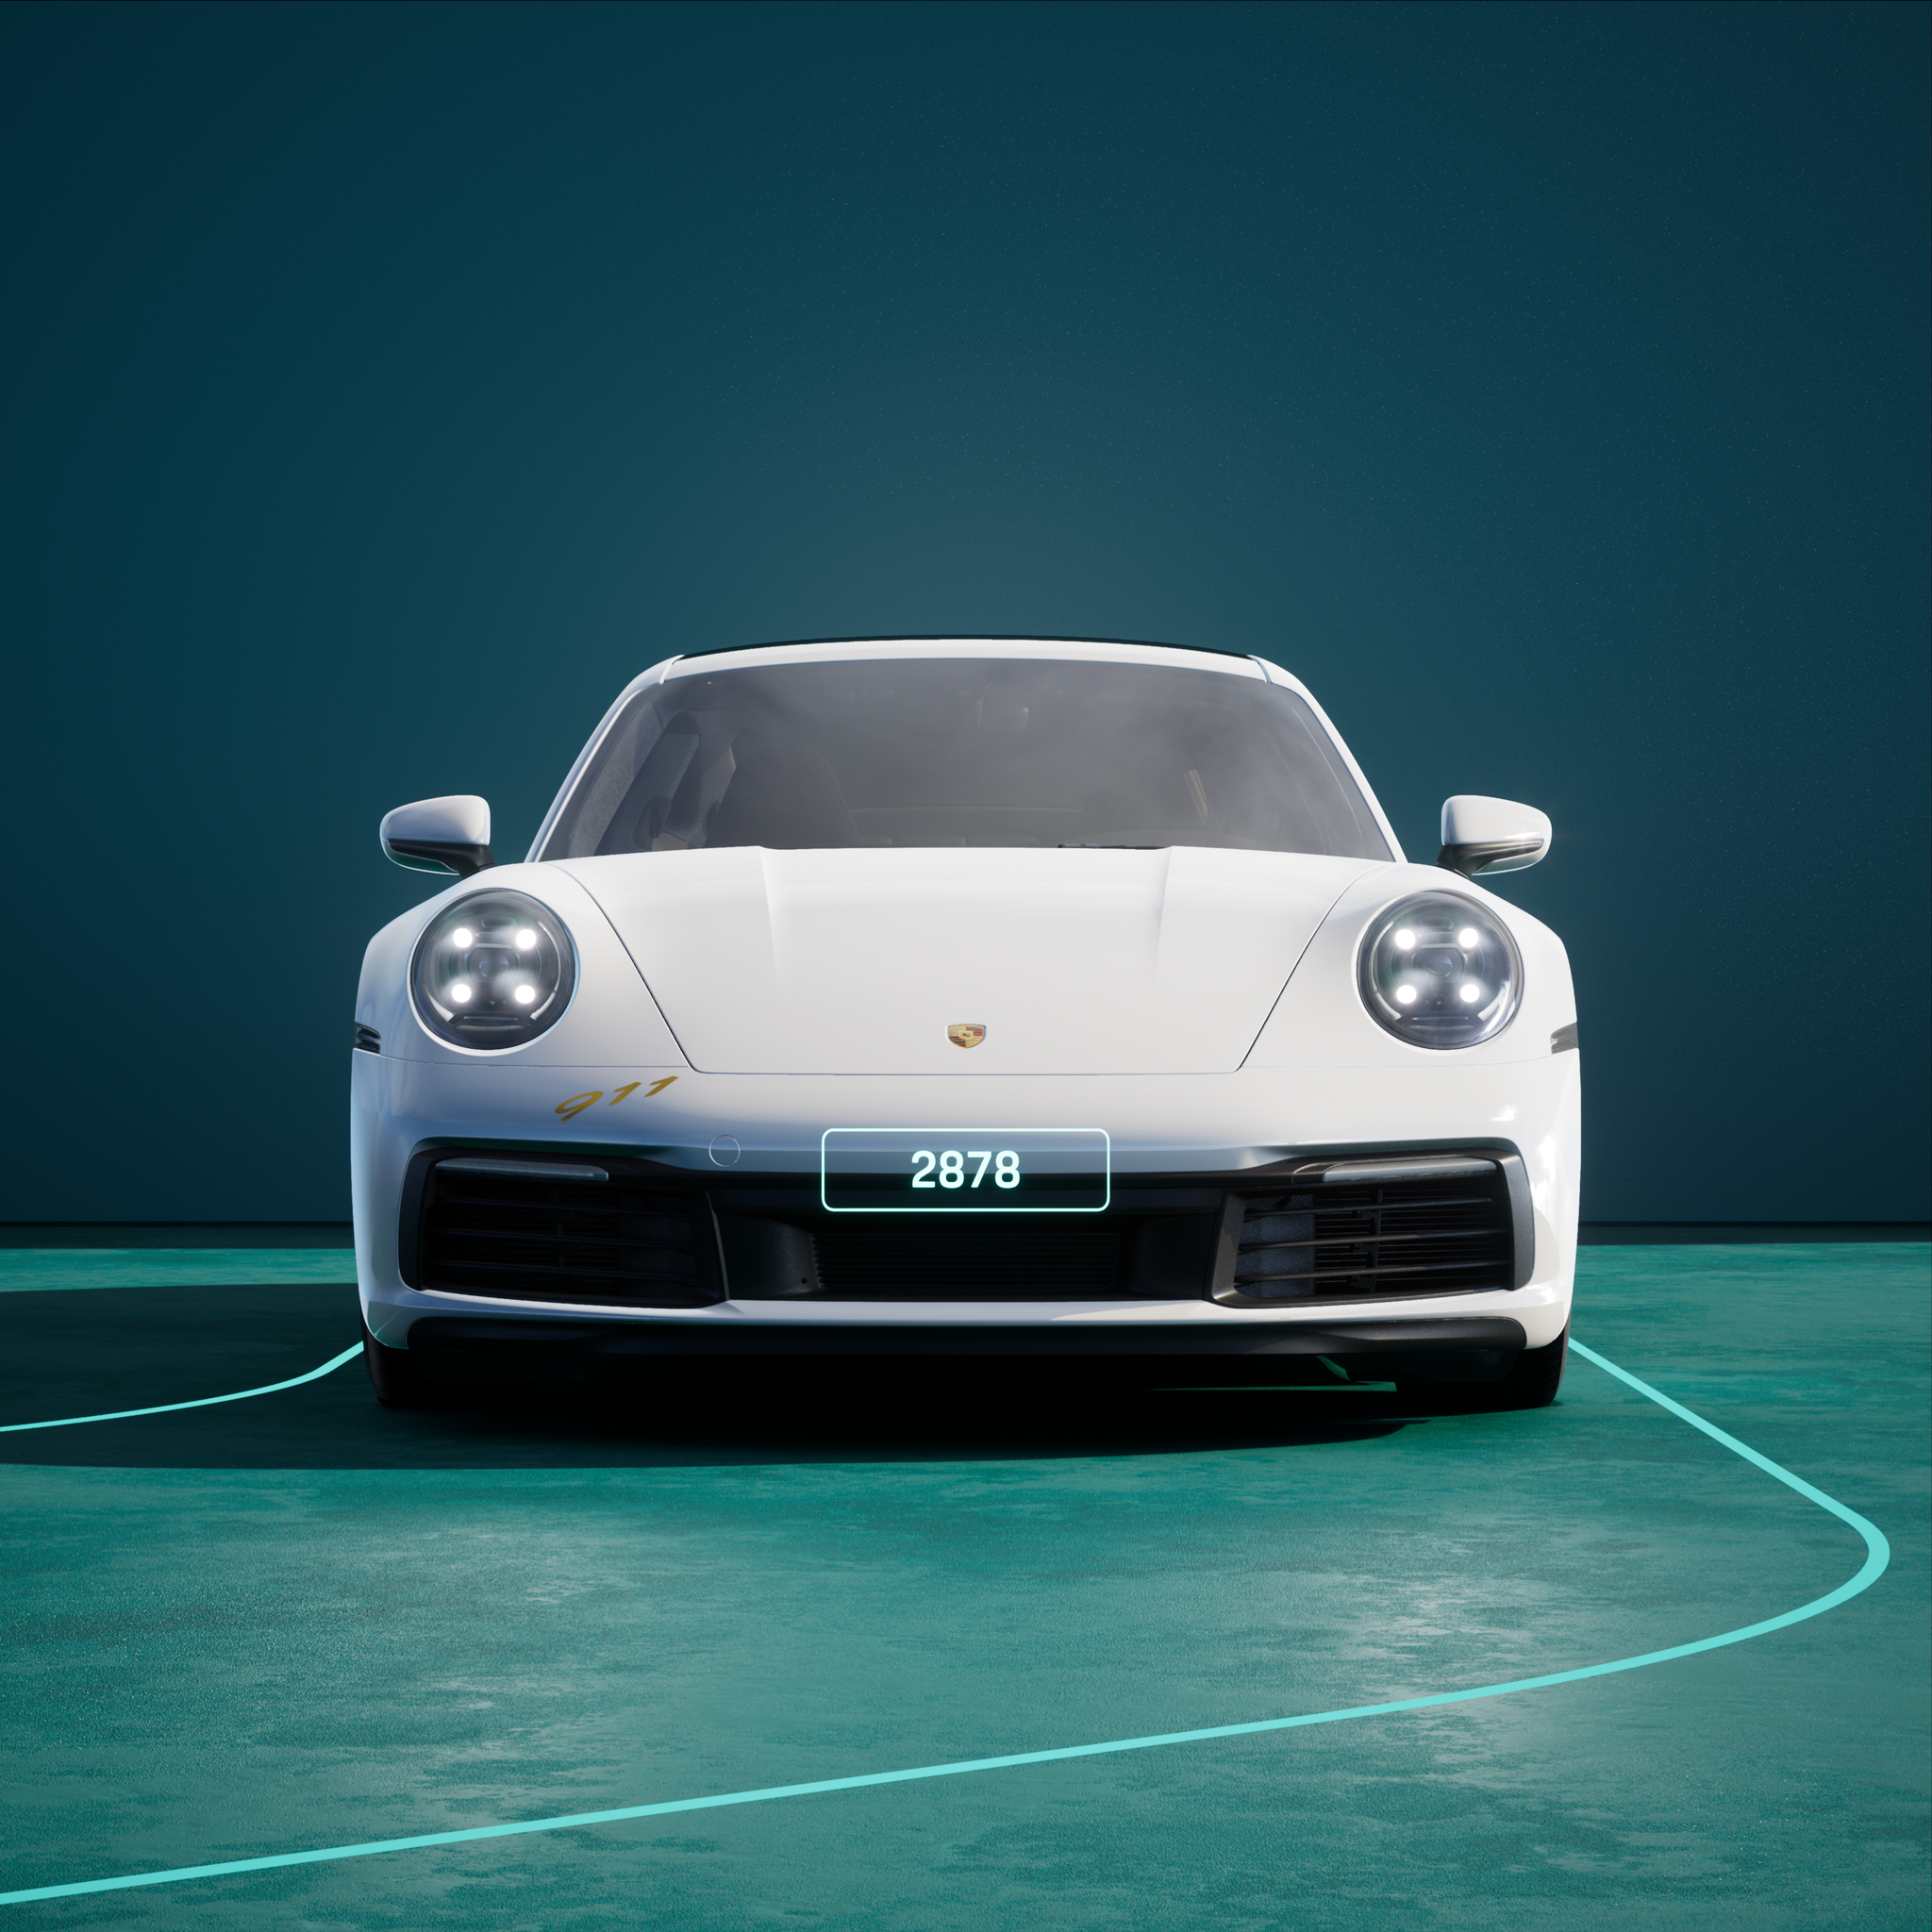 The PORSCHΞ 911 2878 image in phase